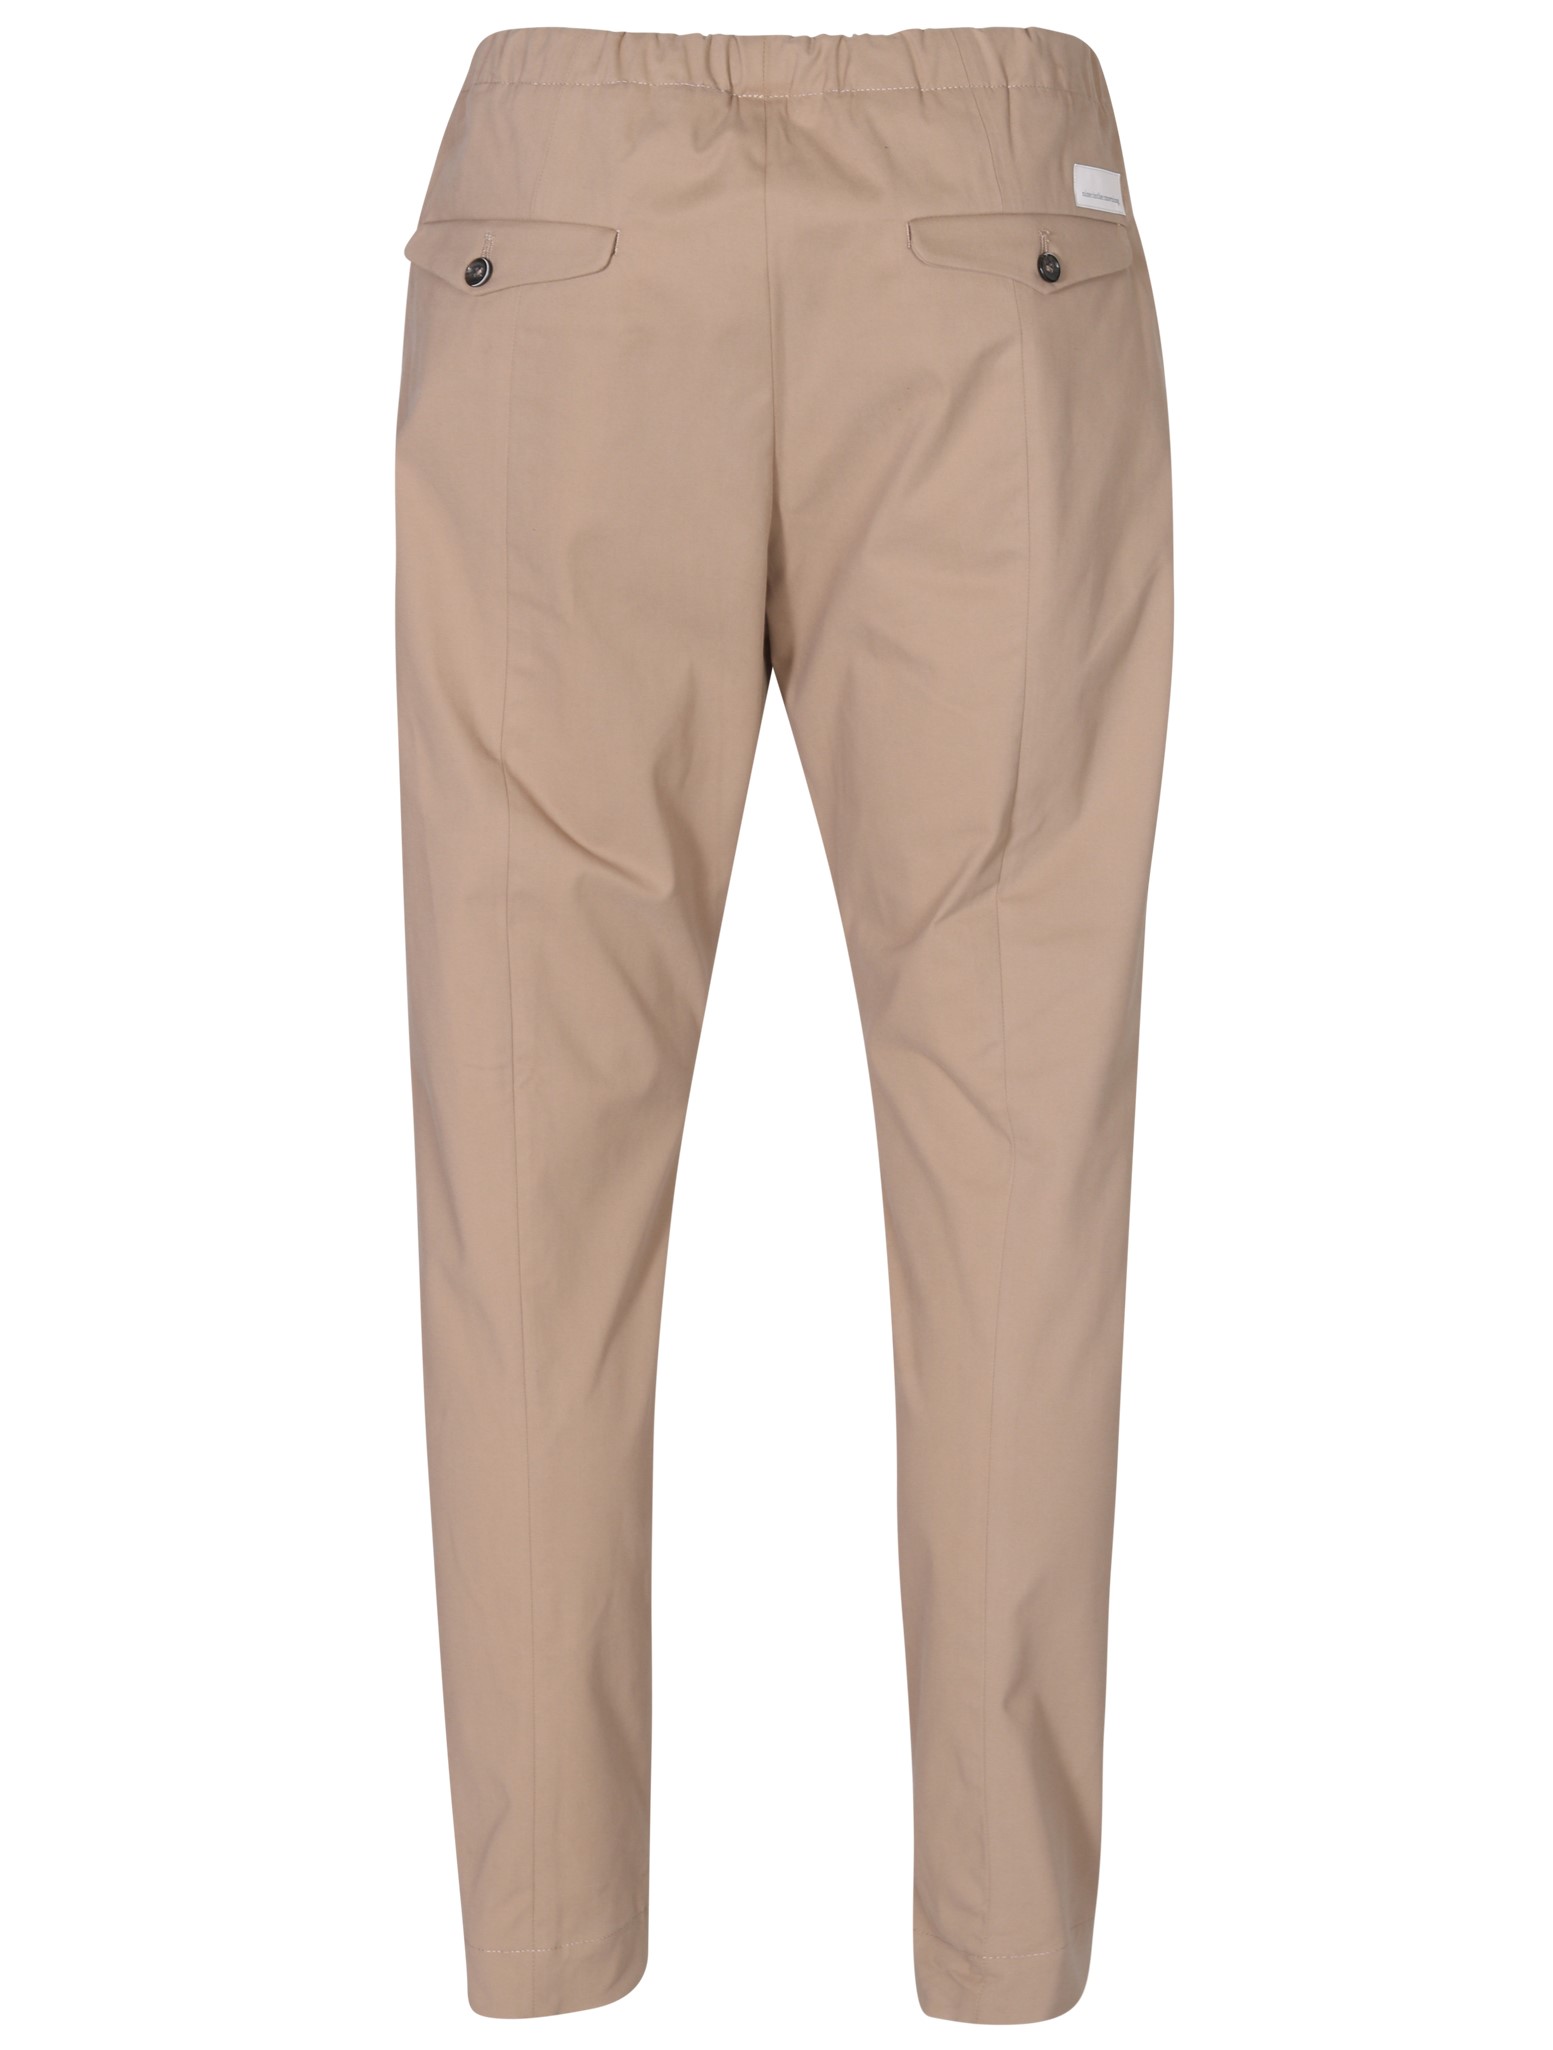 NINE:INTHE:MORNING Mirco Carrot Cotton Stretch Pant in Beige 50